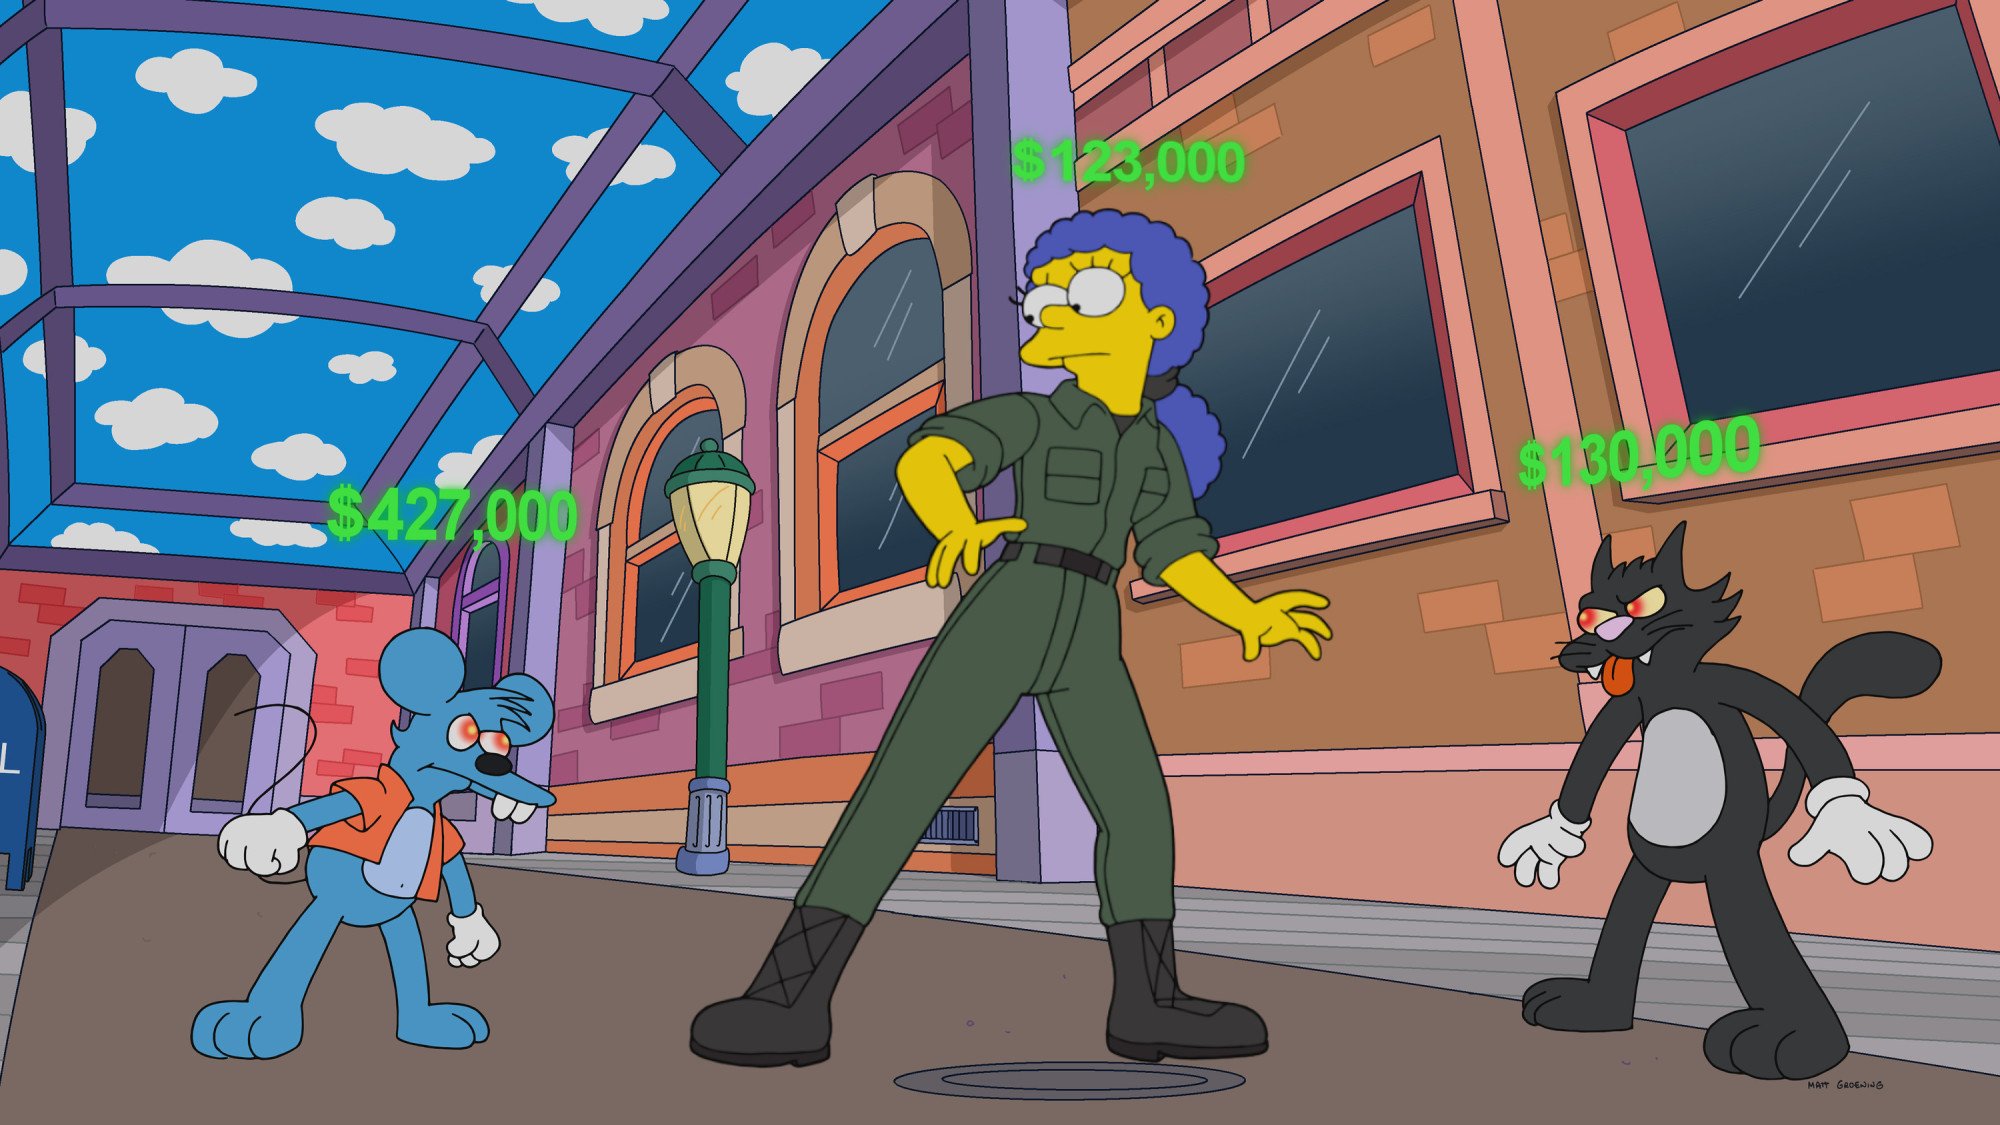 Star Wars - Wikisimpsons, the Simpsons Wiki